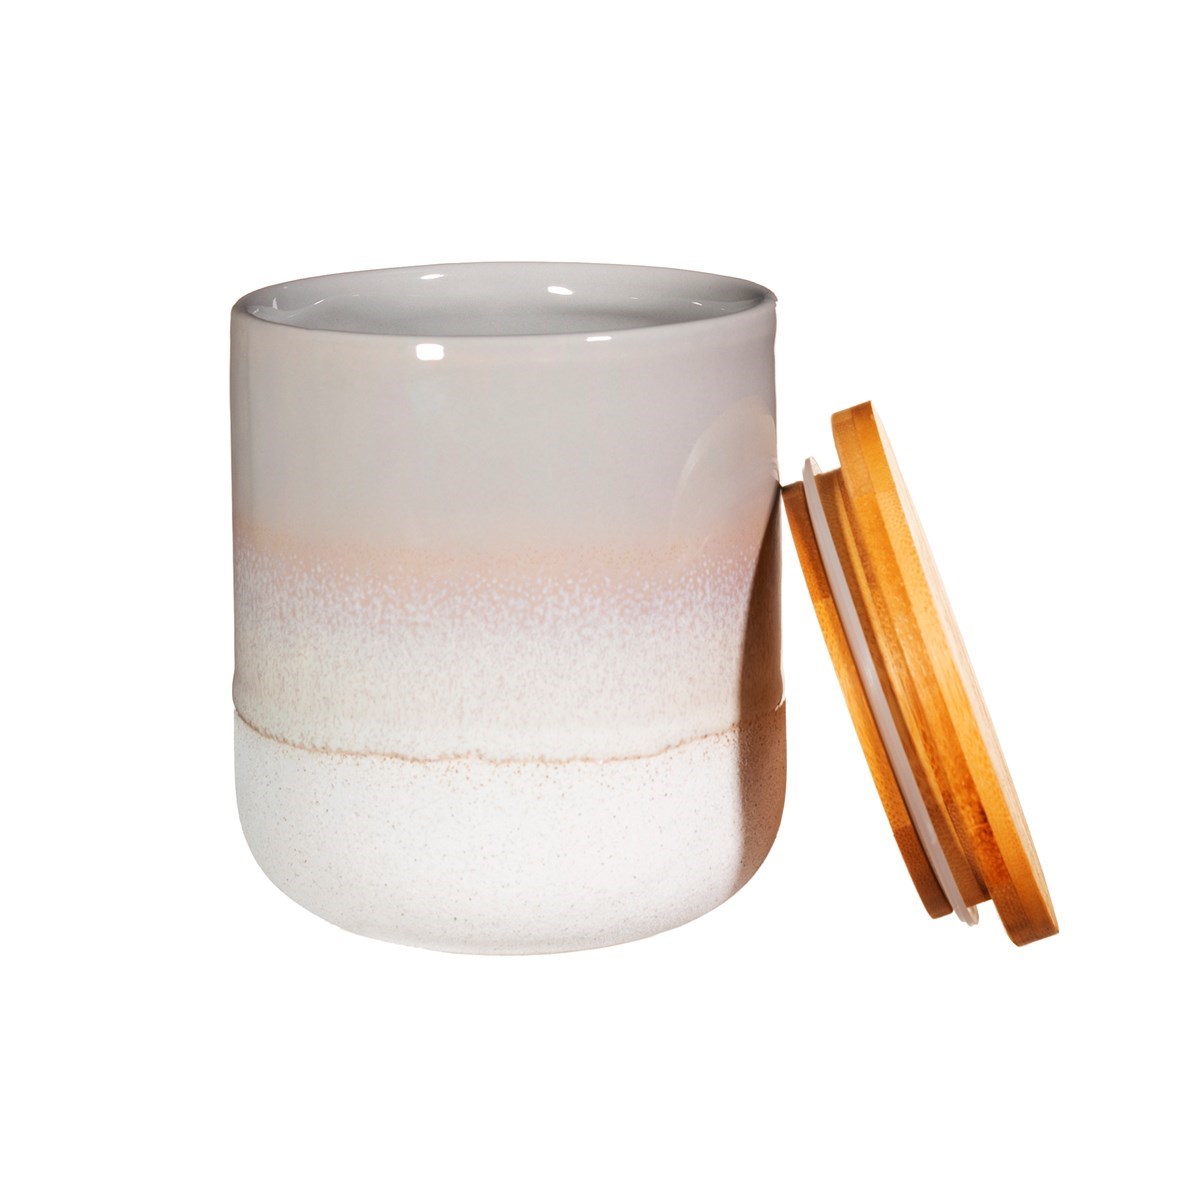 Sass & Belle Mojave Ombre Glaze Storage Canister Grey